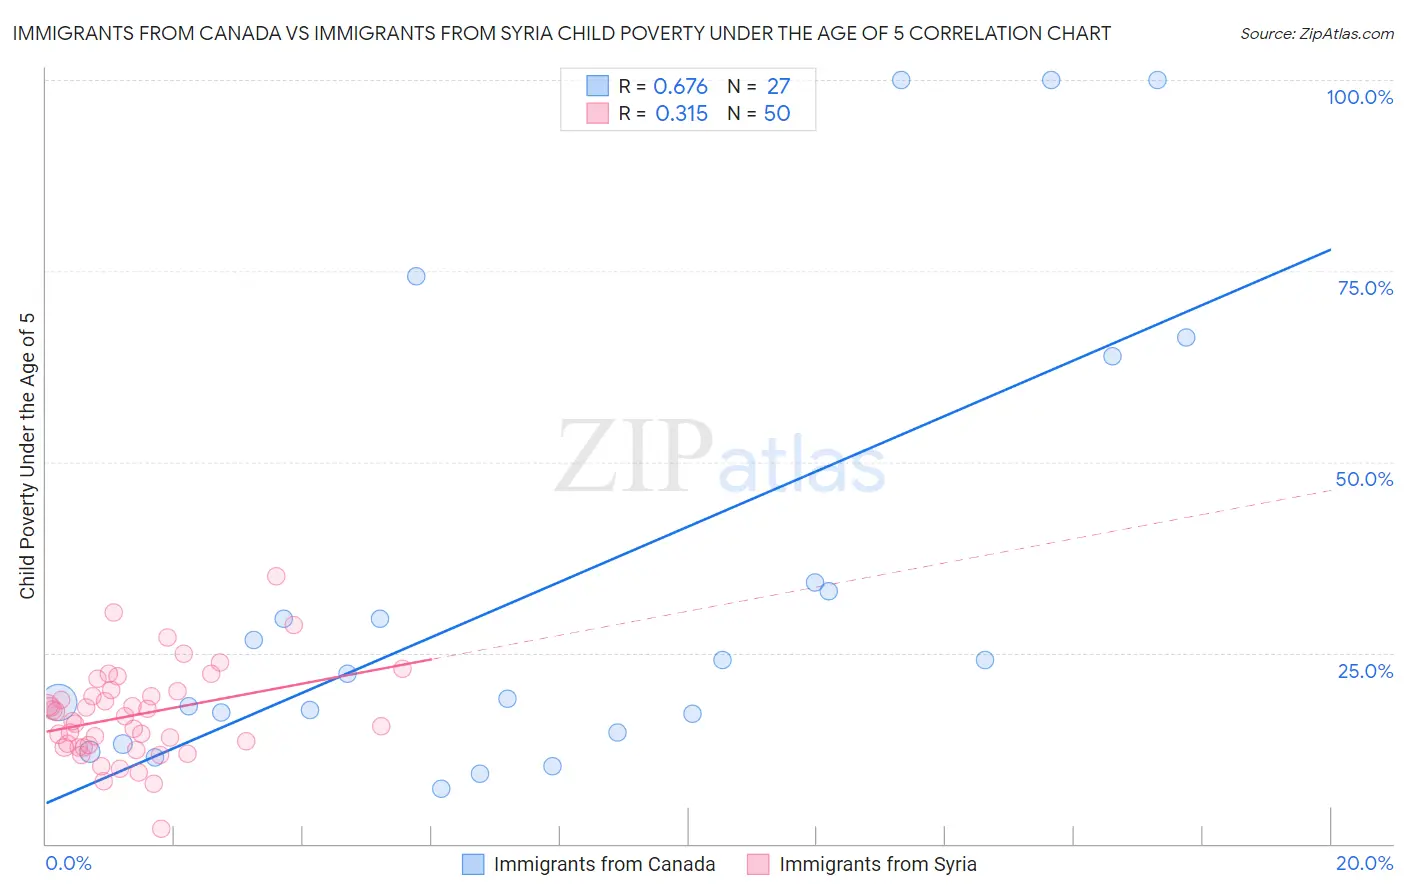 Immigrants from Canada vs Immigrants from Syria Child Poverty Under the Age of 5